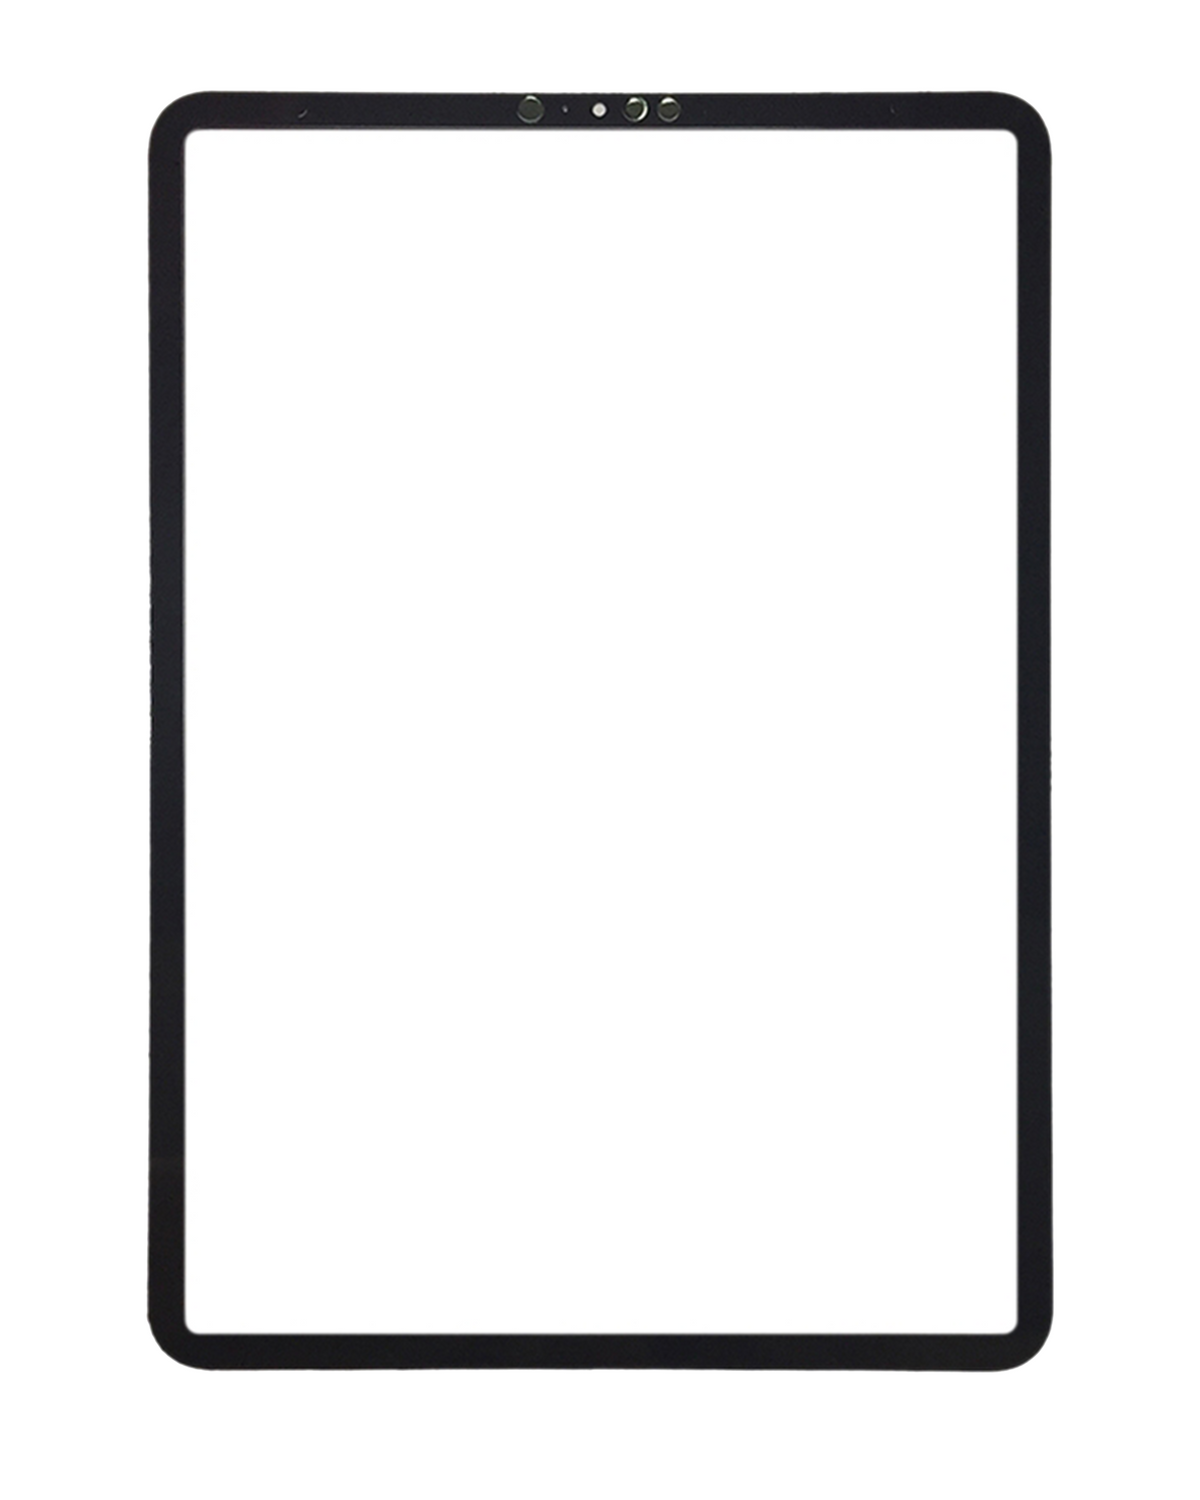 FRONT GLASS (GLASS SEPARATION REQUIRED) COMPATIBLE FOR IPAD PRO 11" 3RD GEN (2021)